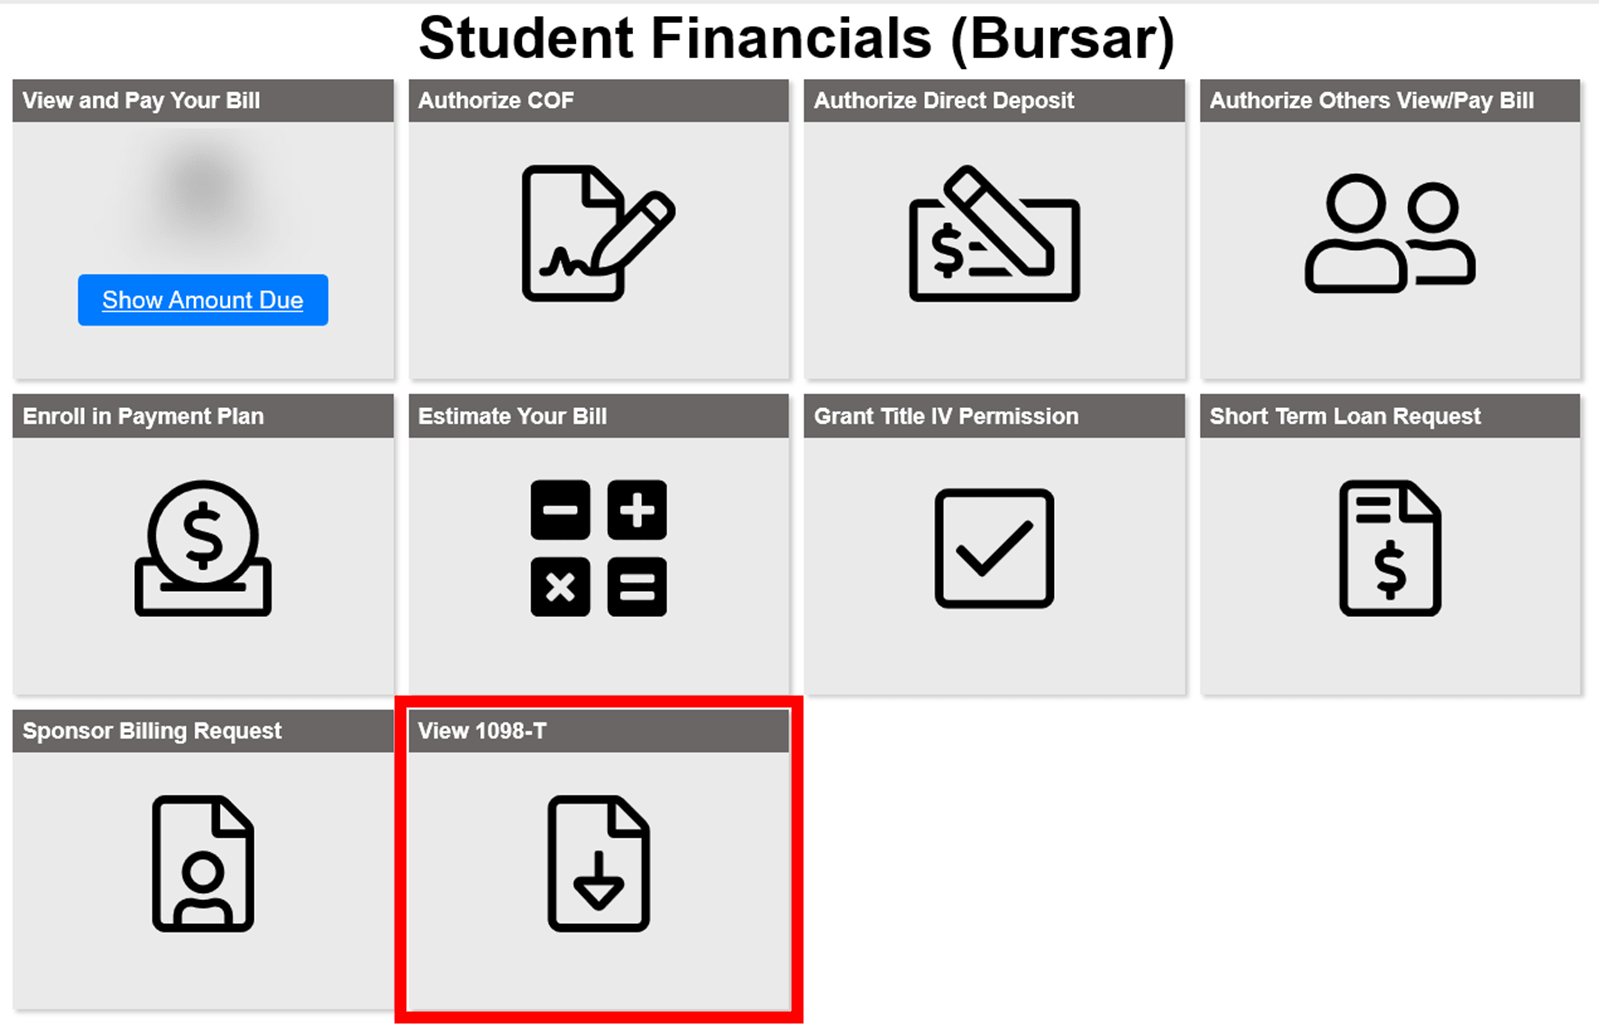 Click on Student Financials Tile - View 1098-T